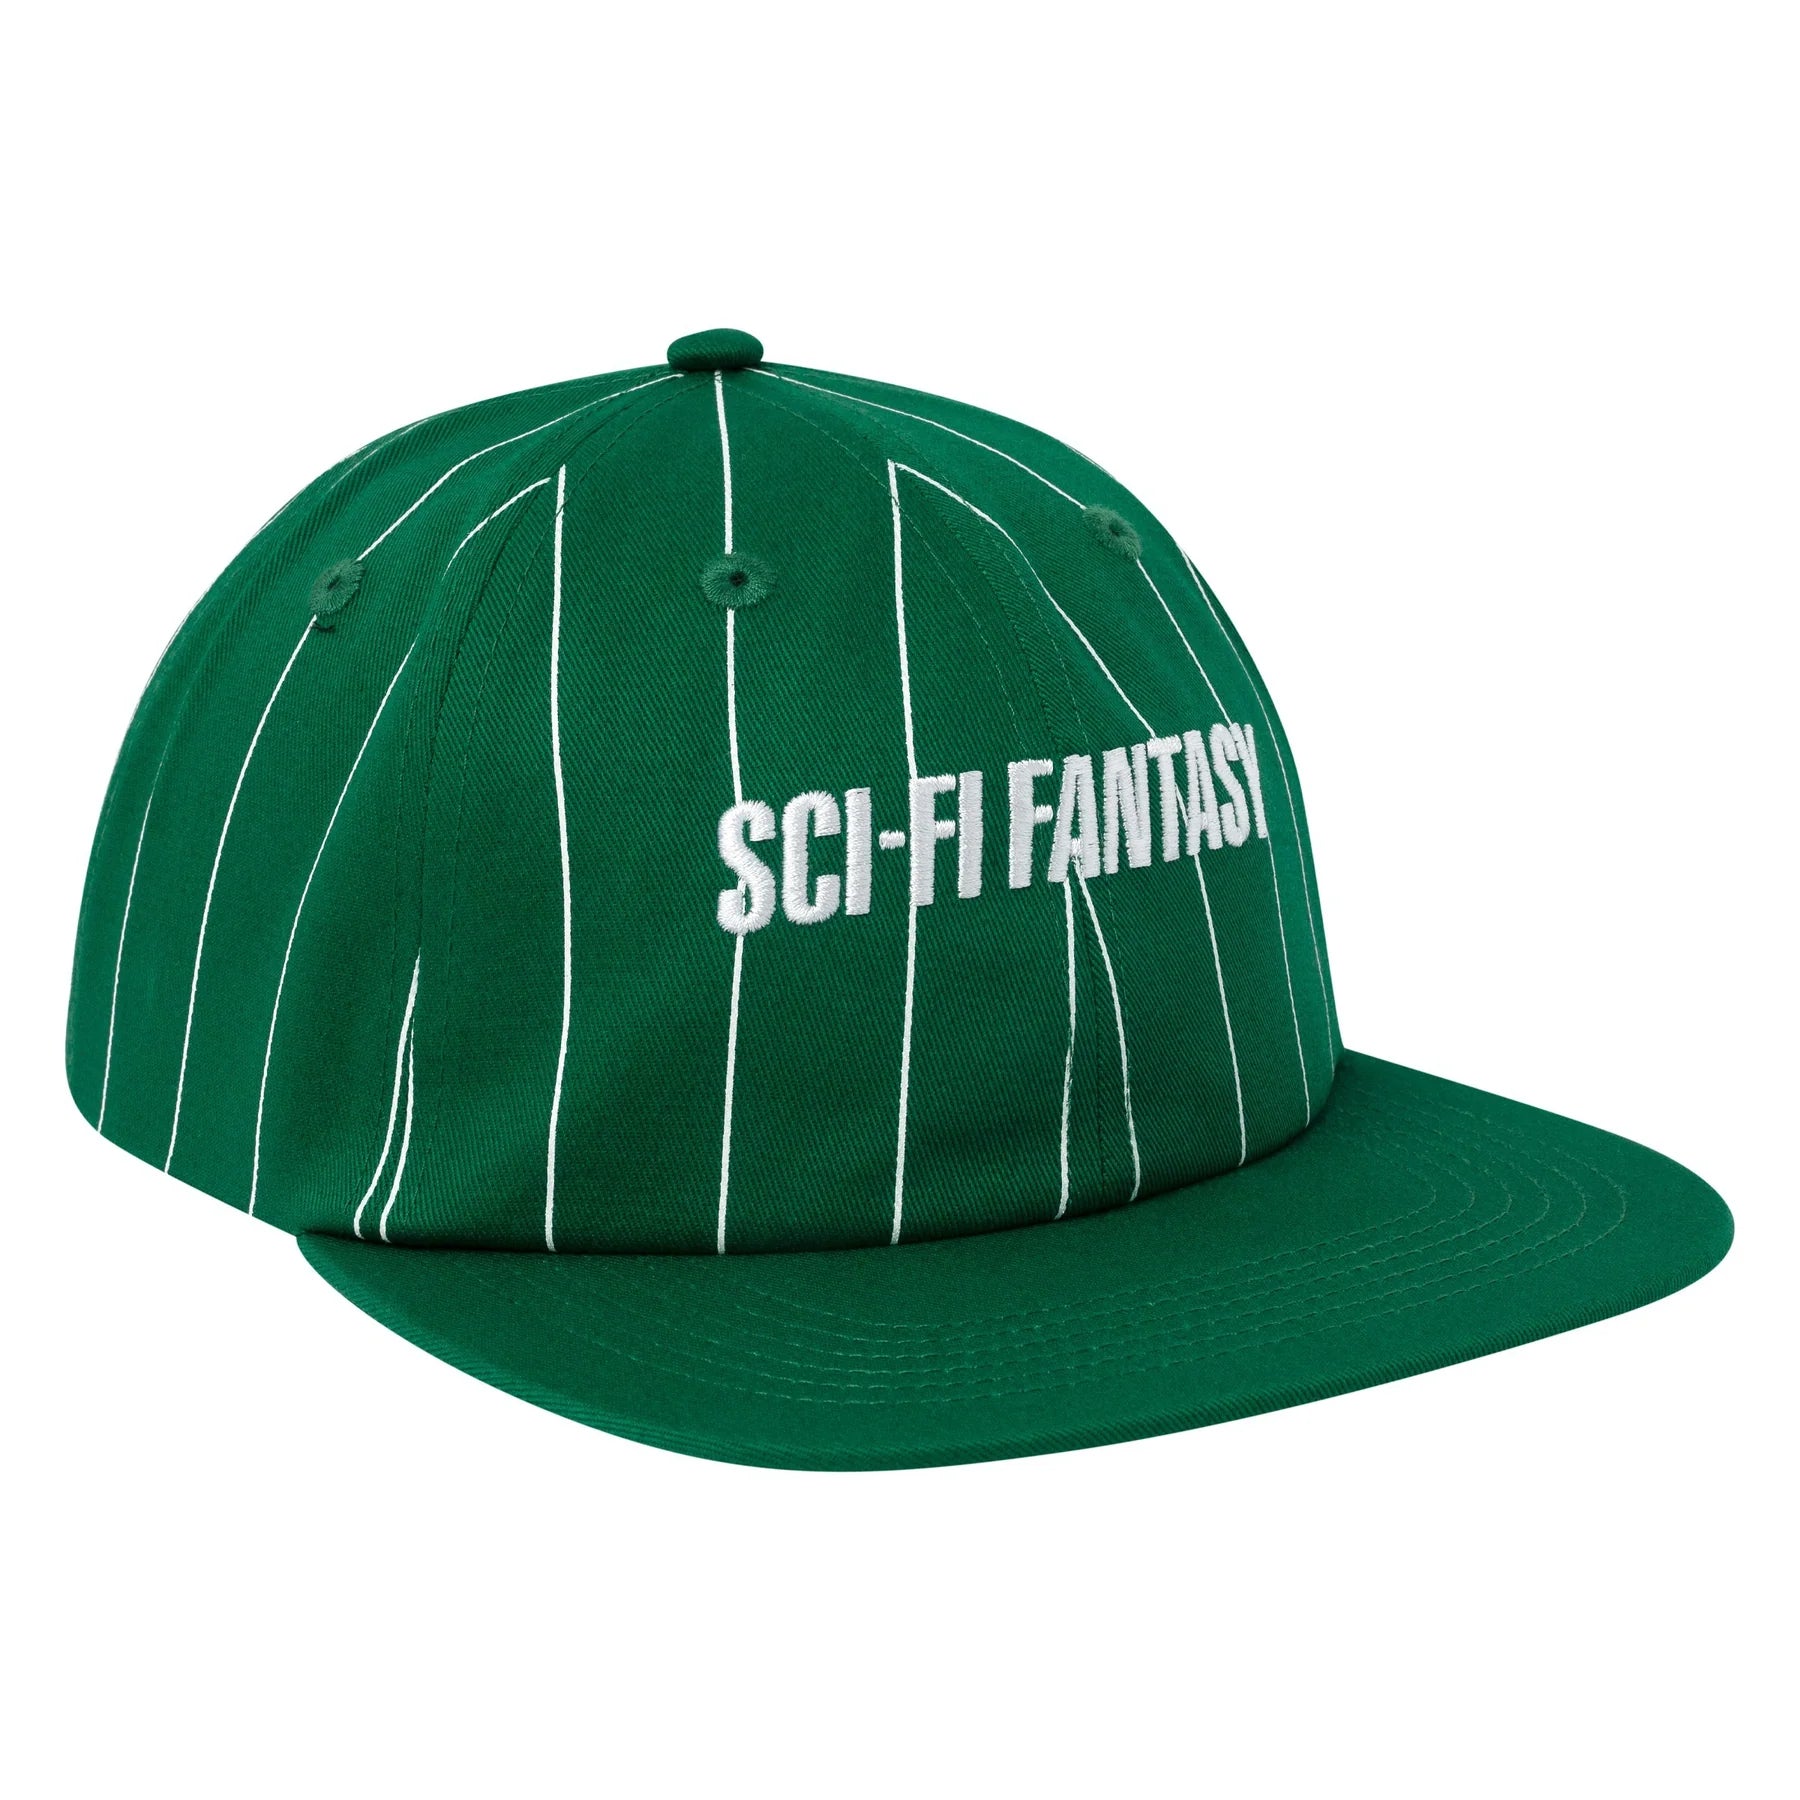 Green sci fi fantasy six panel cap with white stripes and white logo on front. Free uk shipping on orders over £50